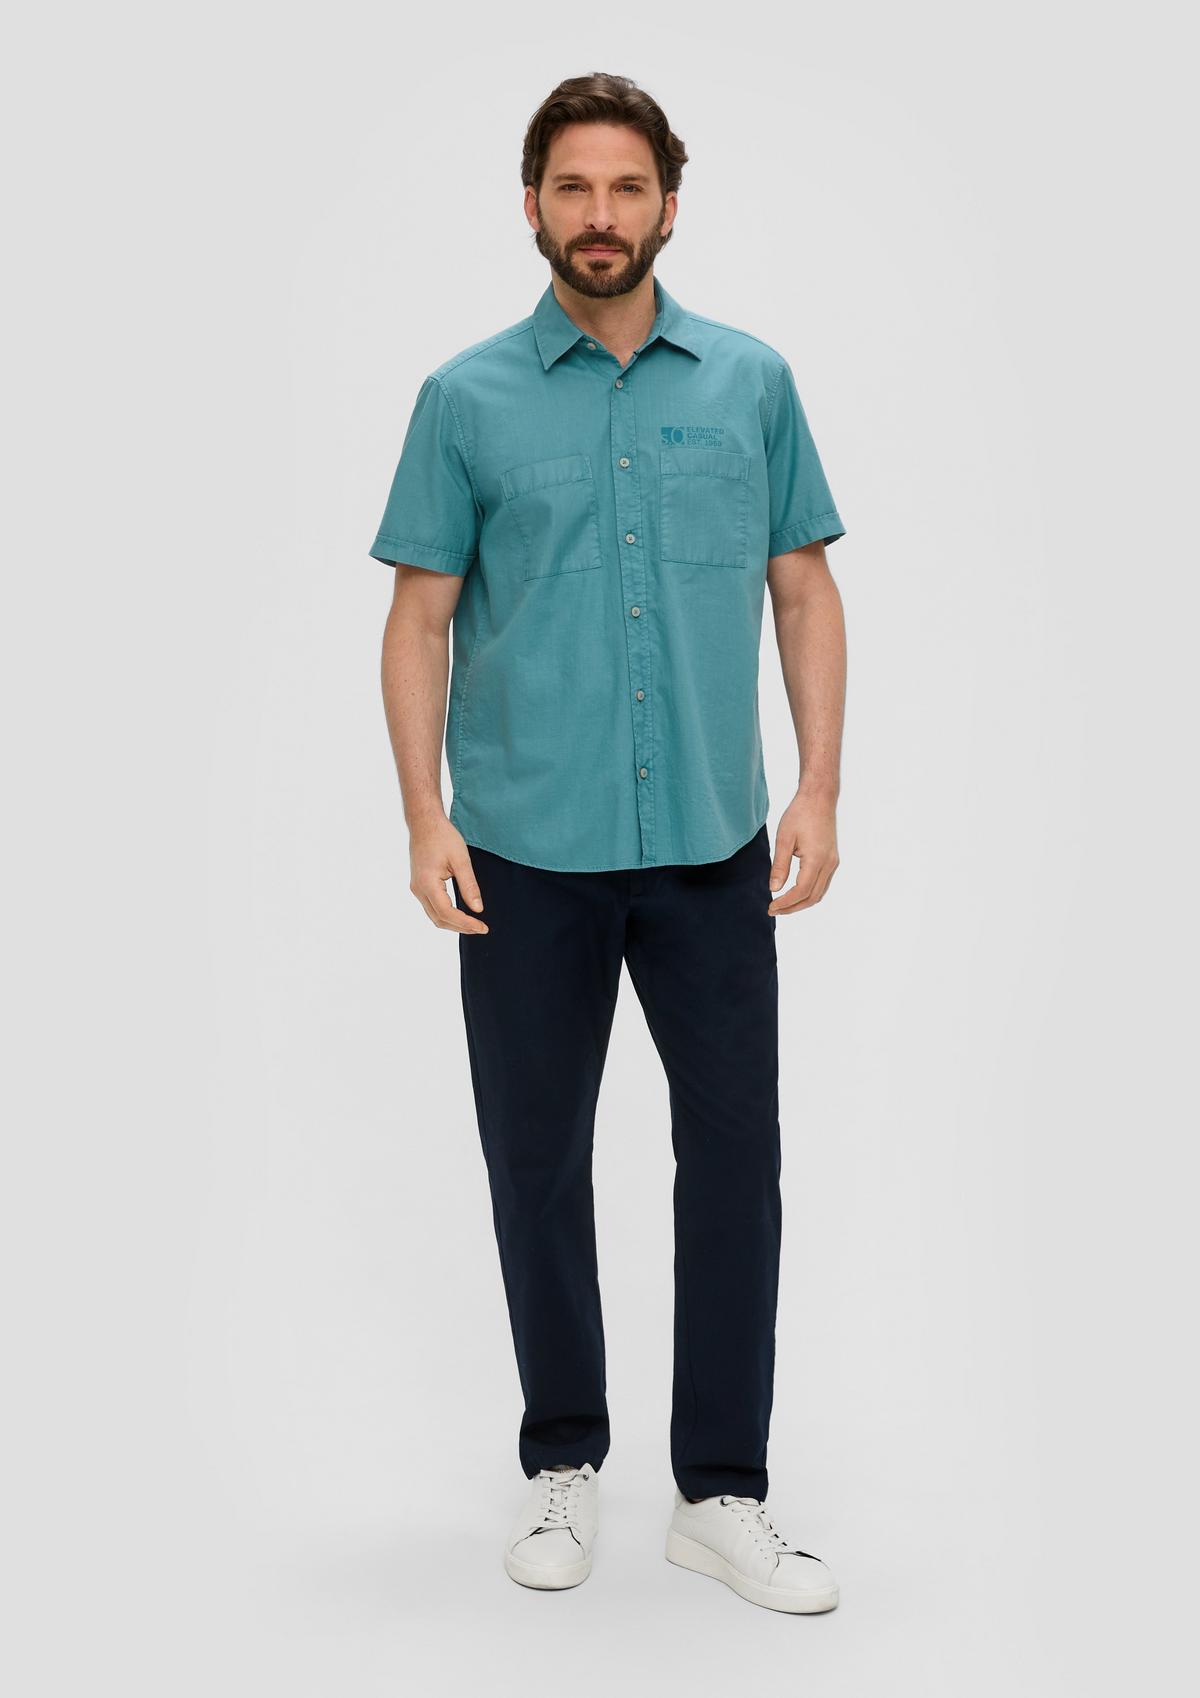 s.Oliver Shirt with a woven texture